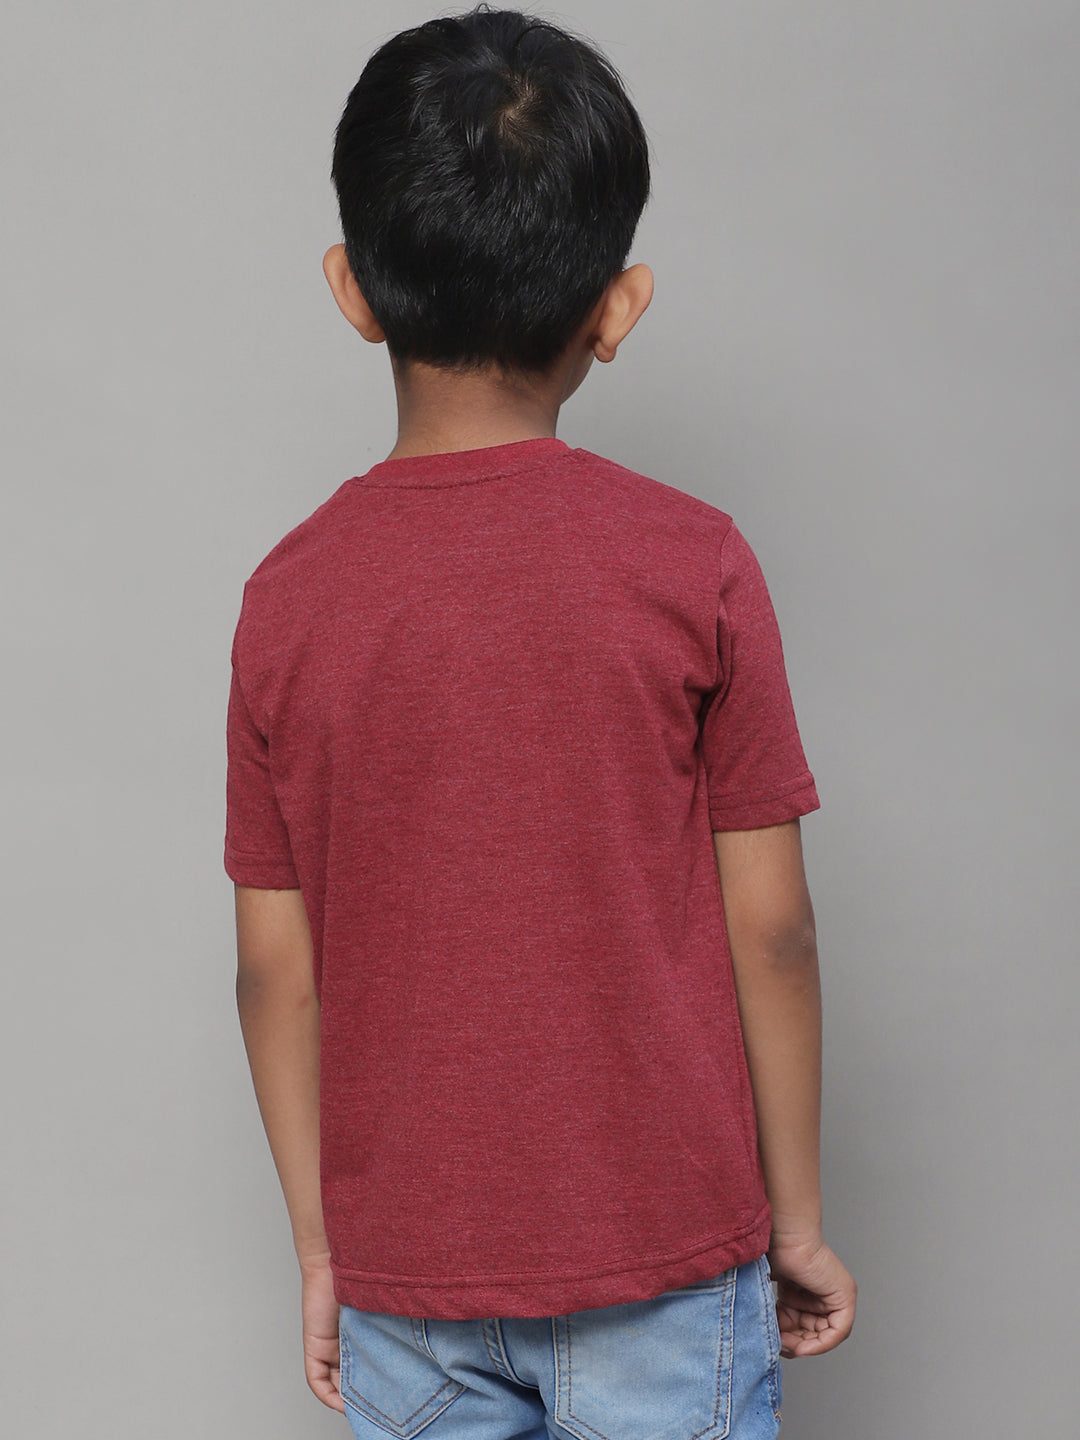 Boys Lets Party Half Sleeves Printed T-Shirt - Friskers